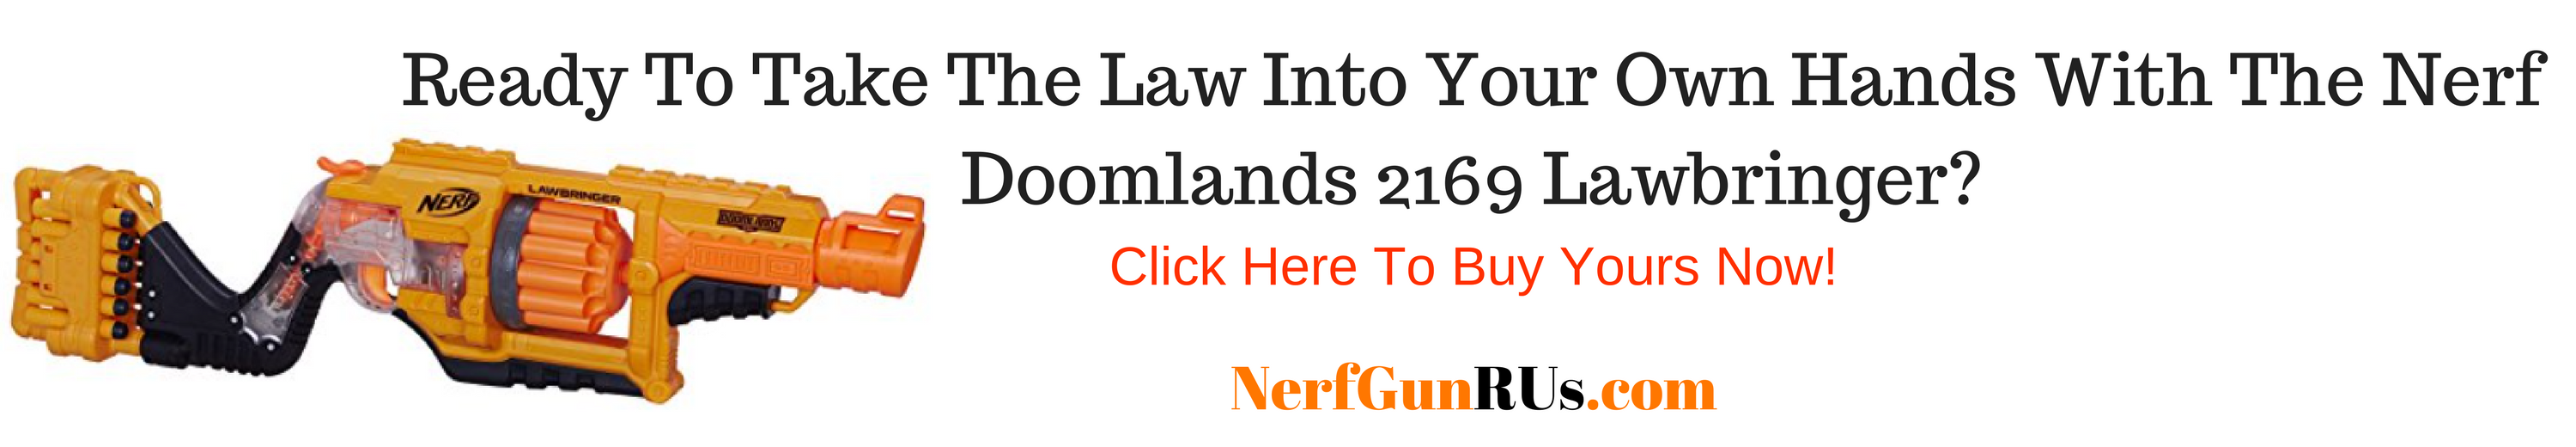 Ready To Take The Law Into Your Own Hands With The Nerf Doomlands 2169 Lawbringer | NerfGunRUs.com